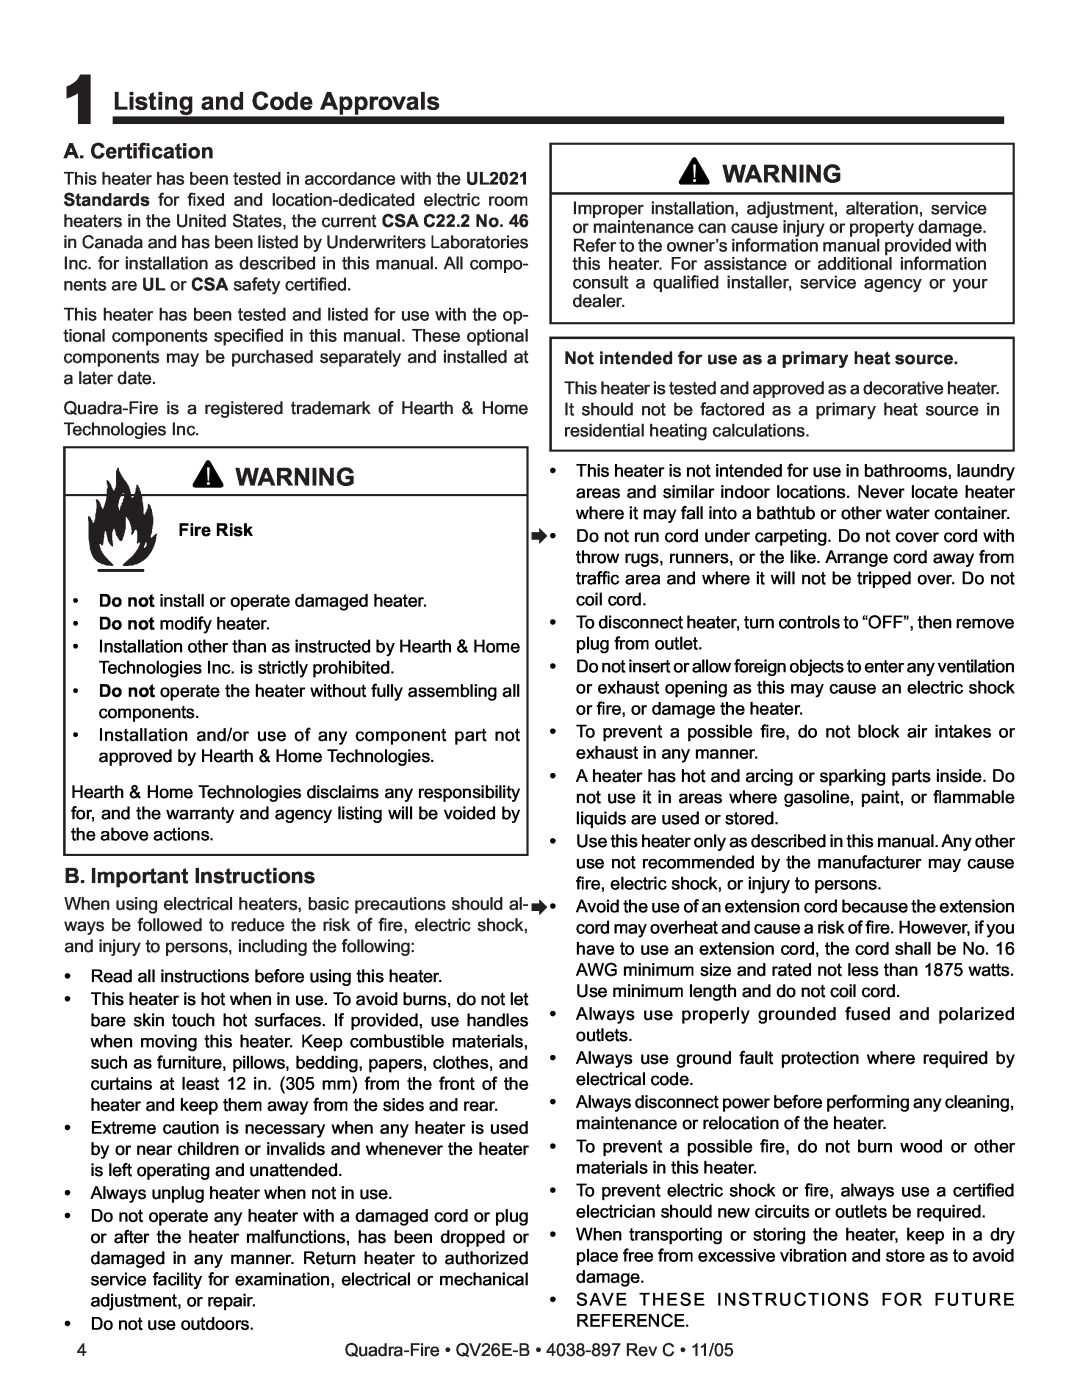 Quadra-Fire QV26E-B owner manual B. Important Instructions, Not intended for use as a primary heat source, Fire Risk 